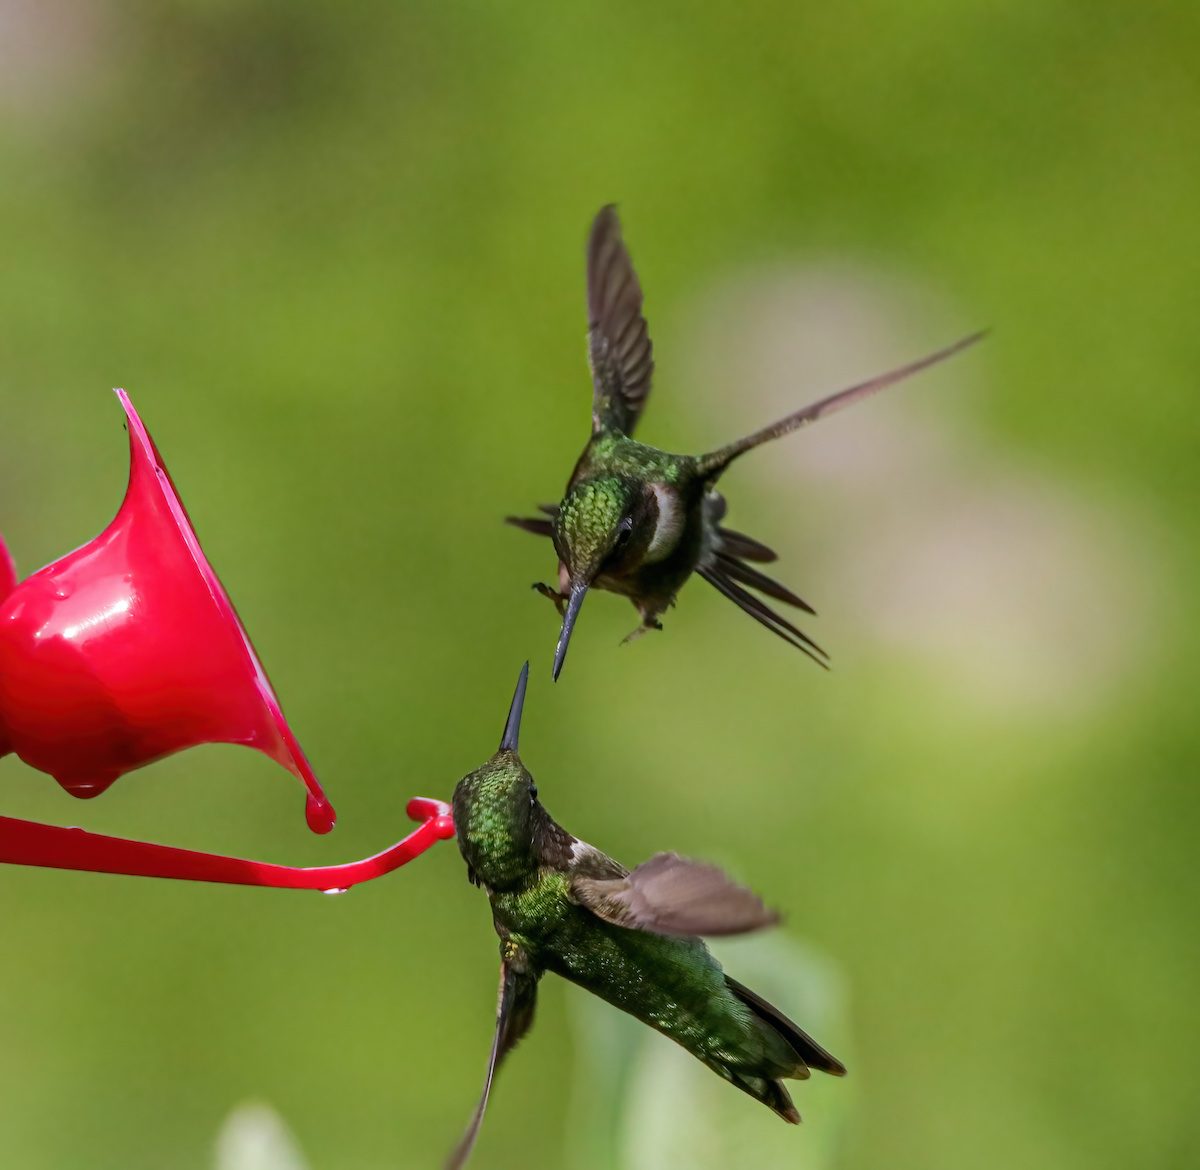 Do Fighting Hummingbirds Ever Hurt Each Other?